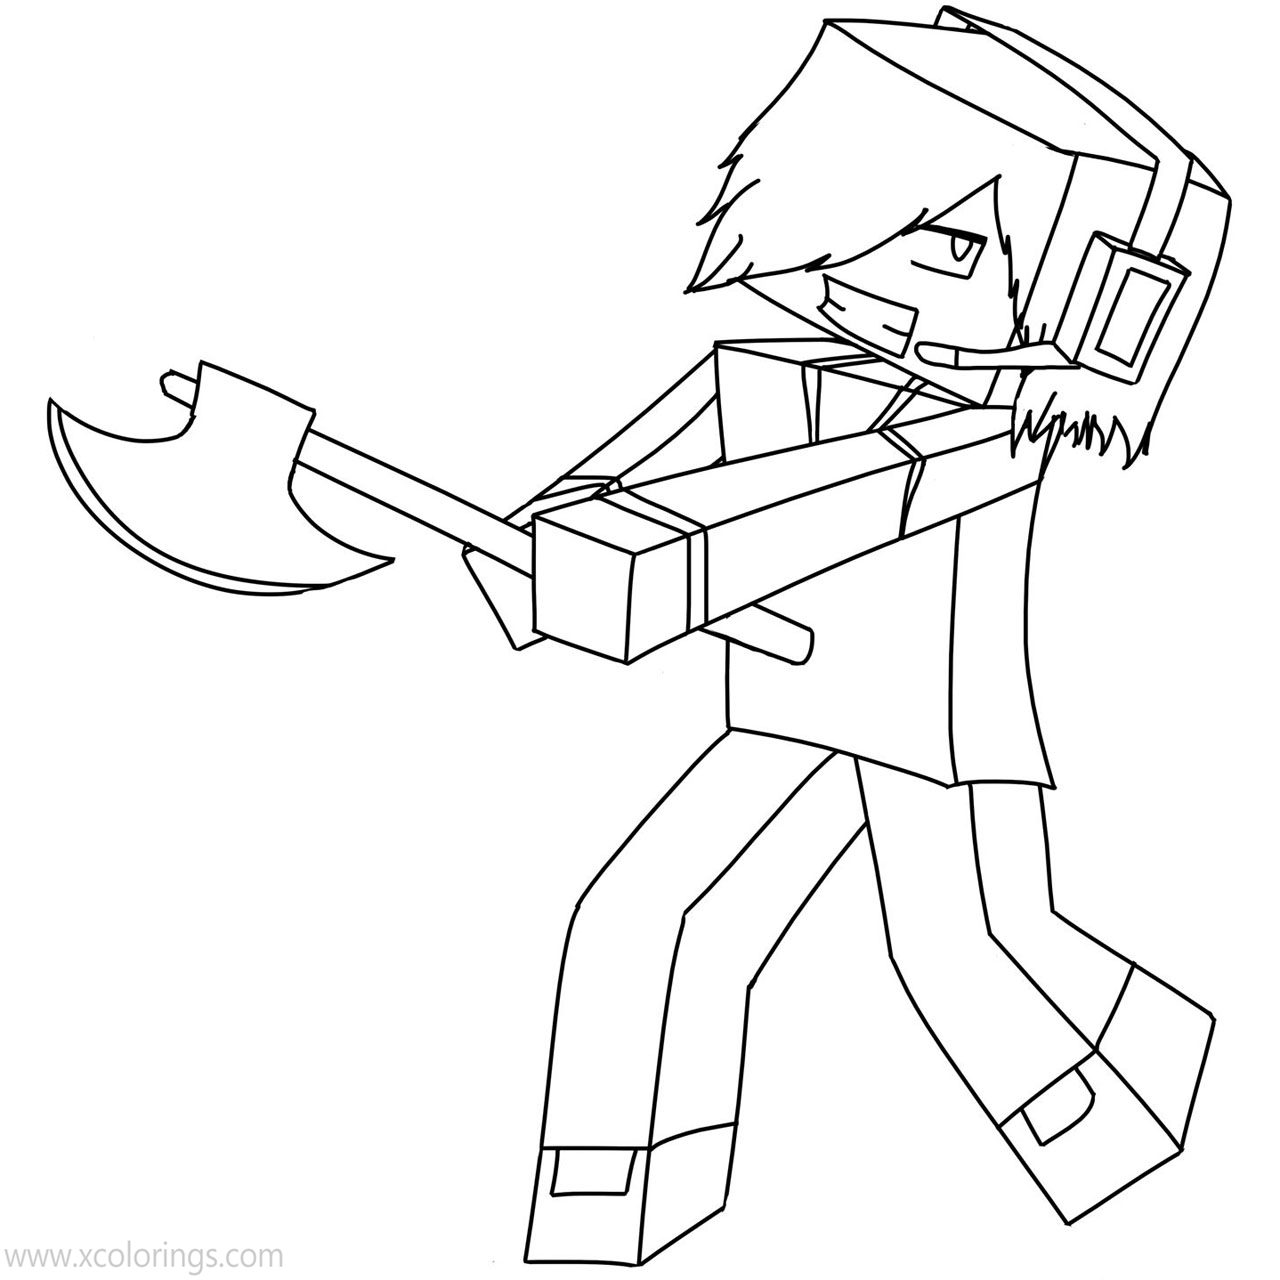 Minecraft Steve with Axe Coloring Pages - XColorings.com